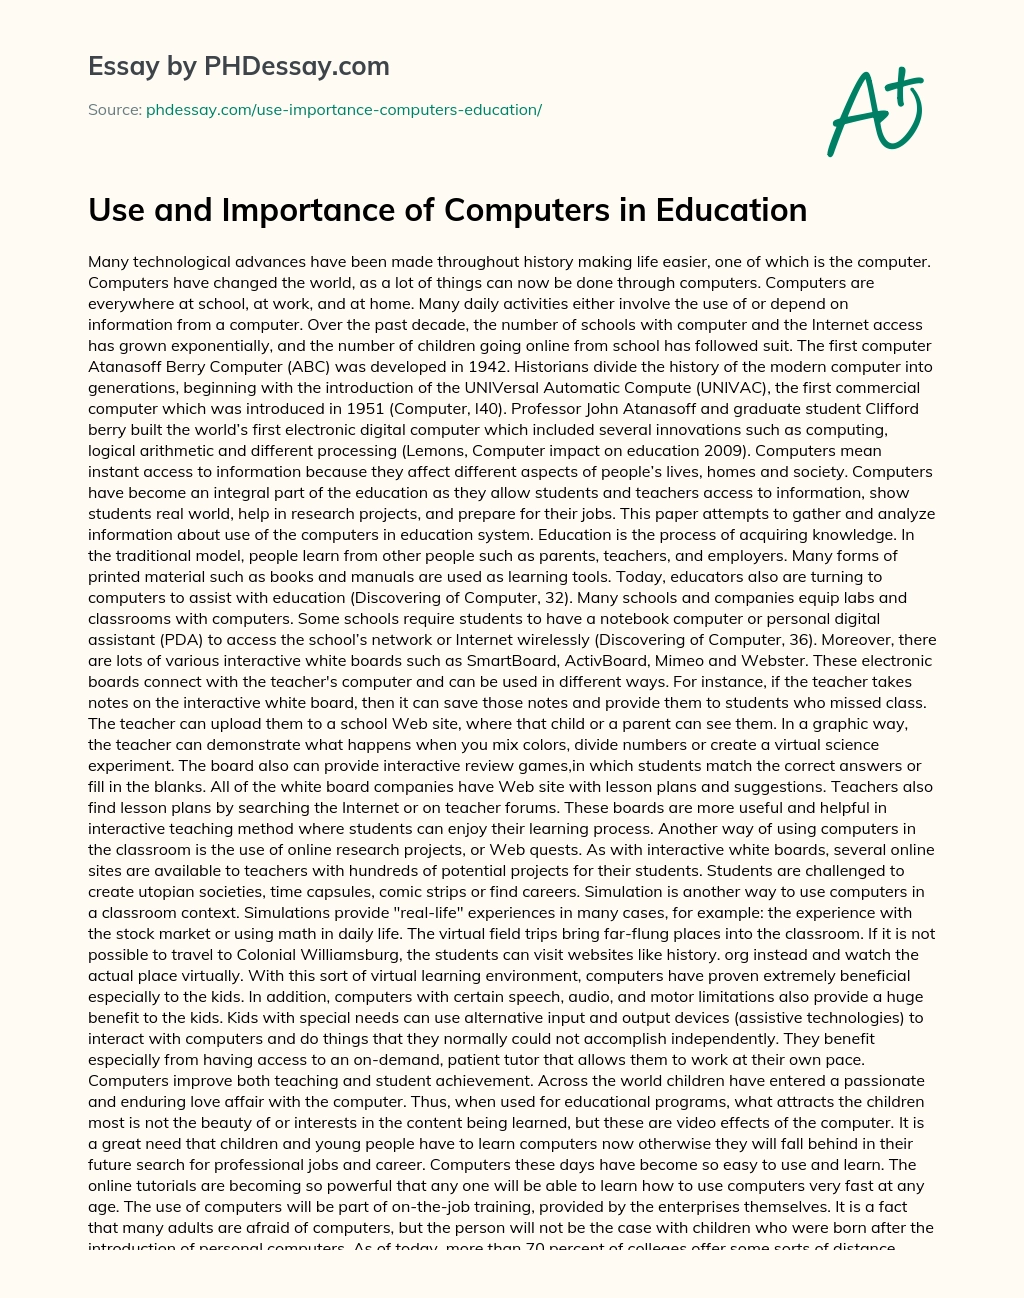 Use and Importance of Computers in Education essay